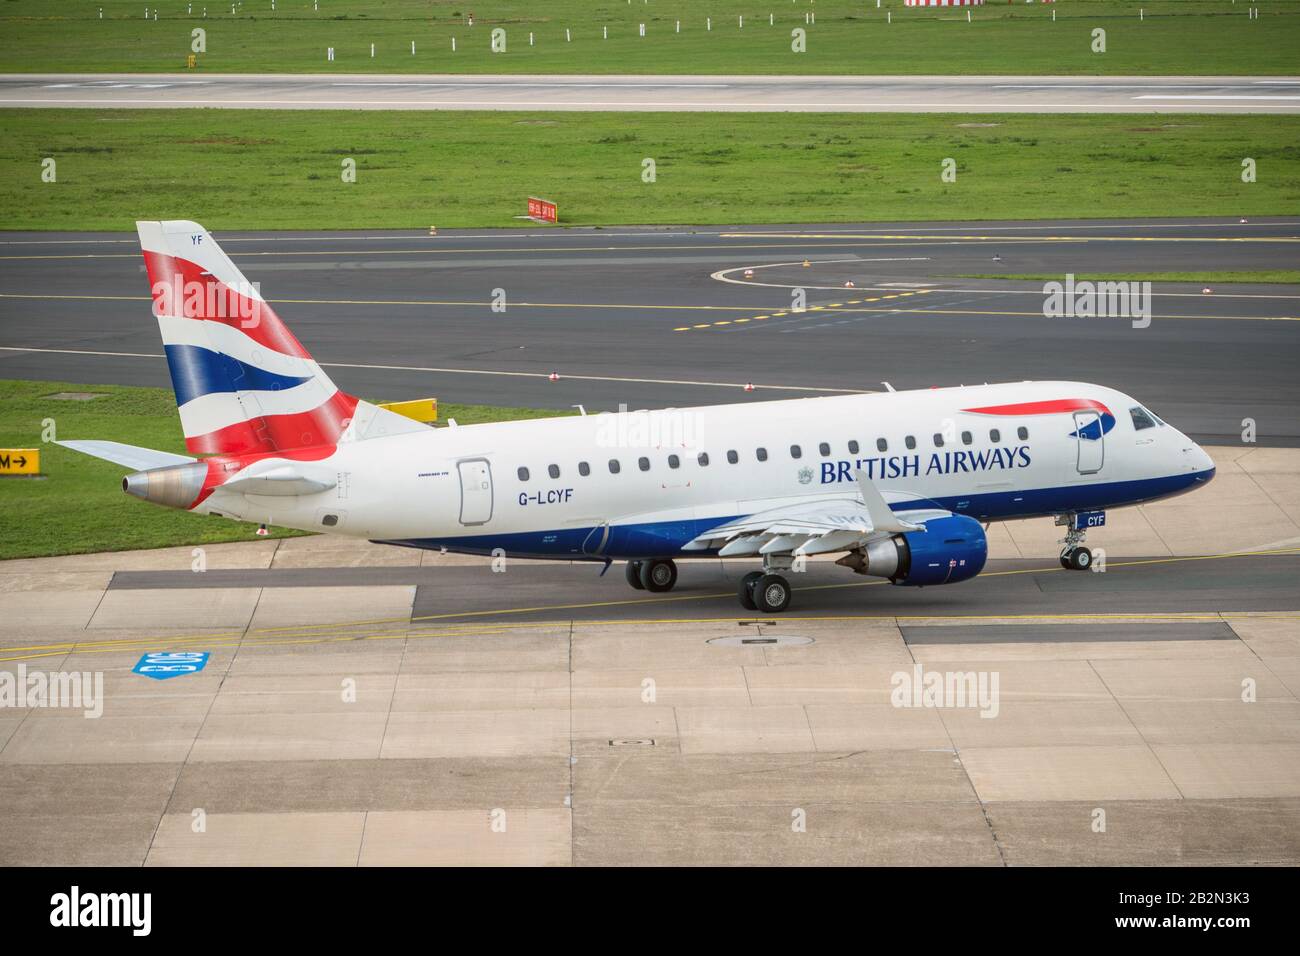 Aircraft of British Airways on runway after landing Stock Photo